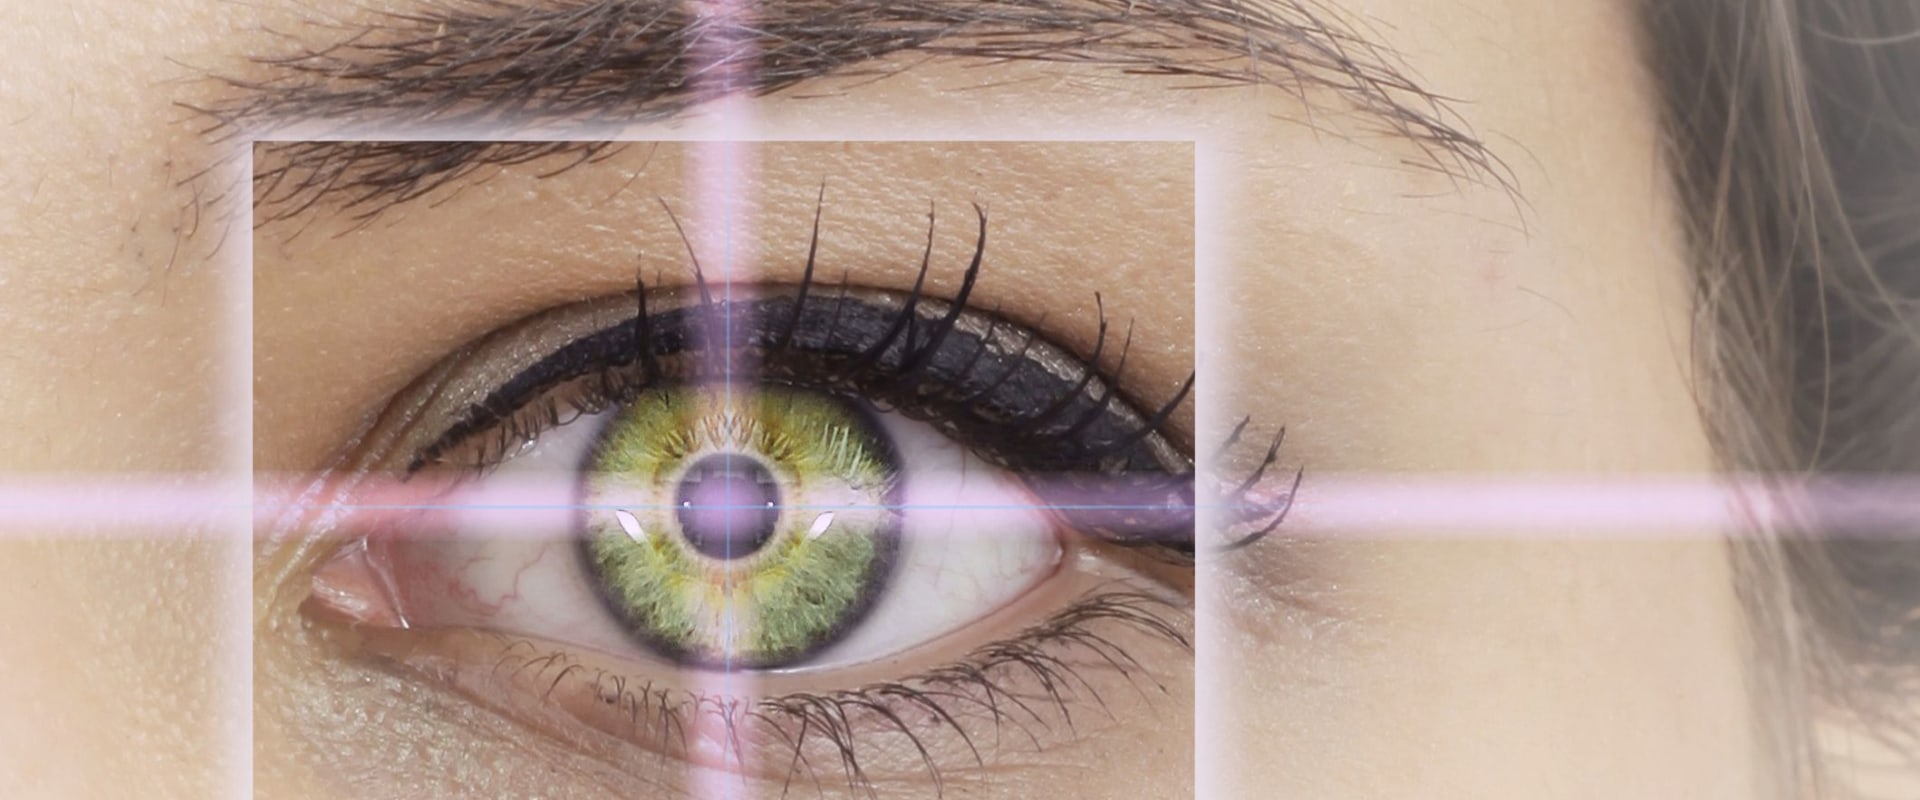 Does LASIK Surgery Last Forever?